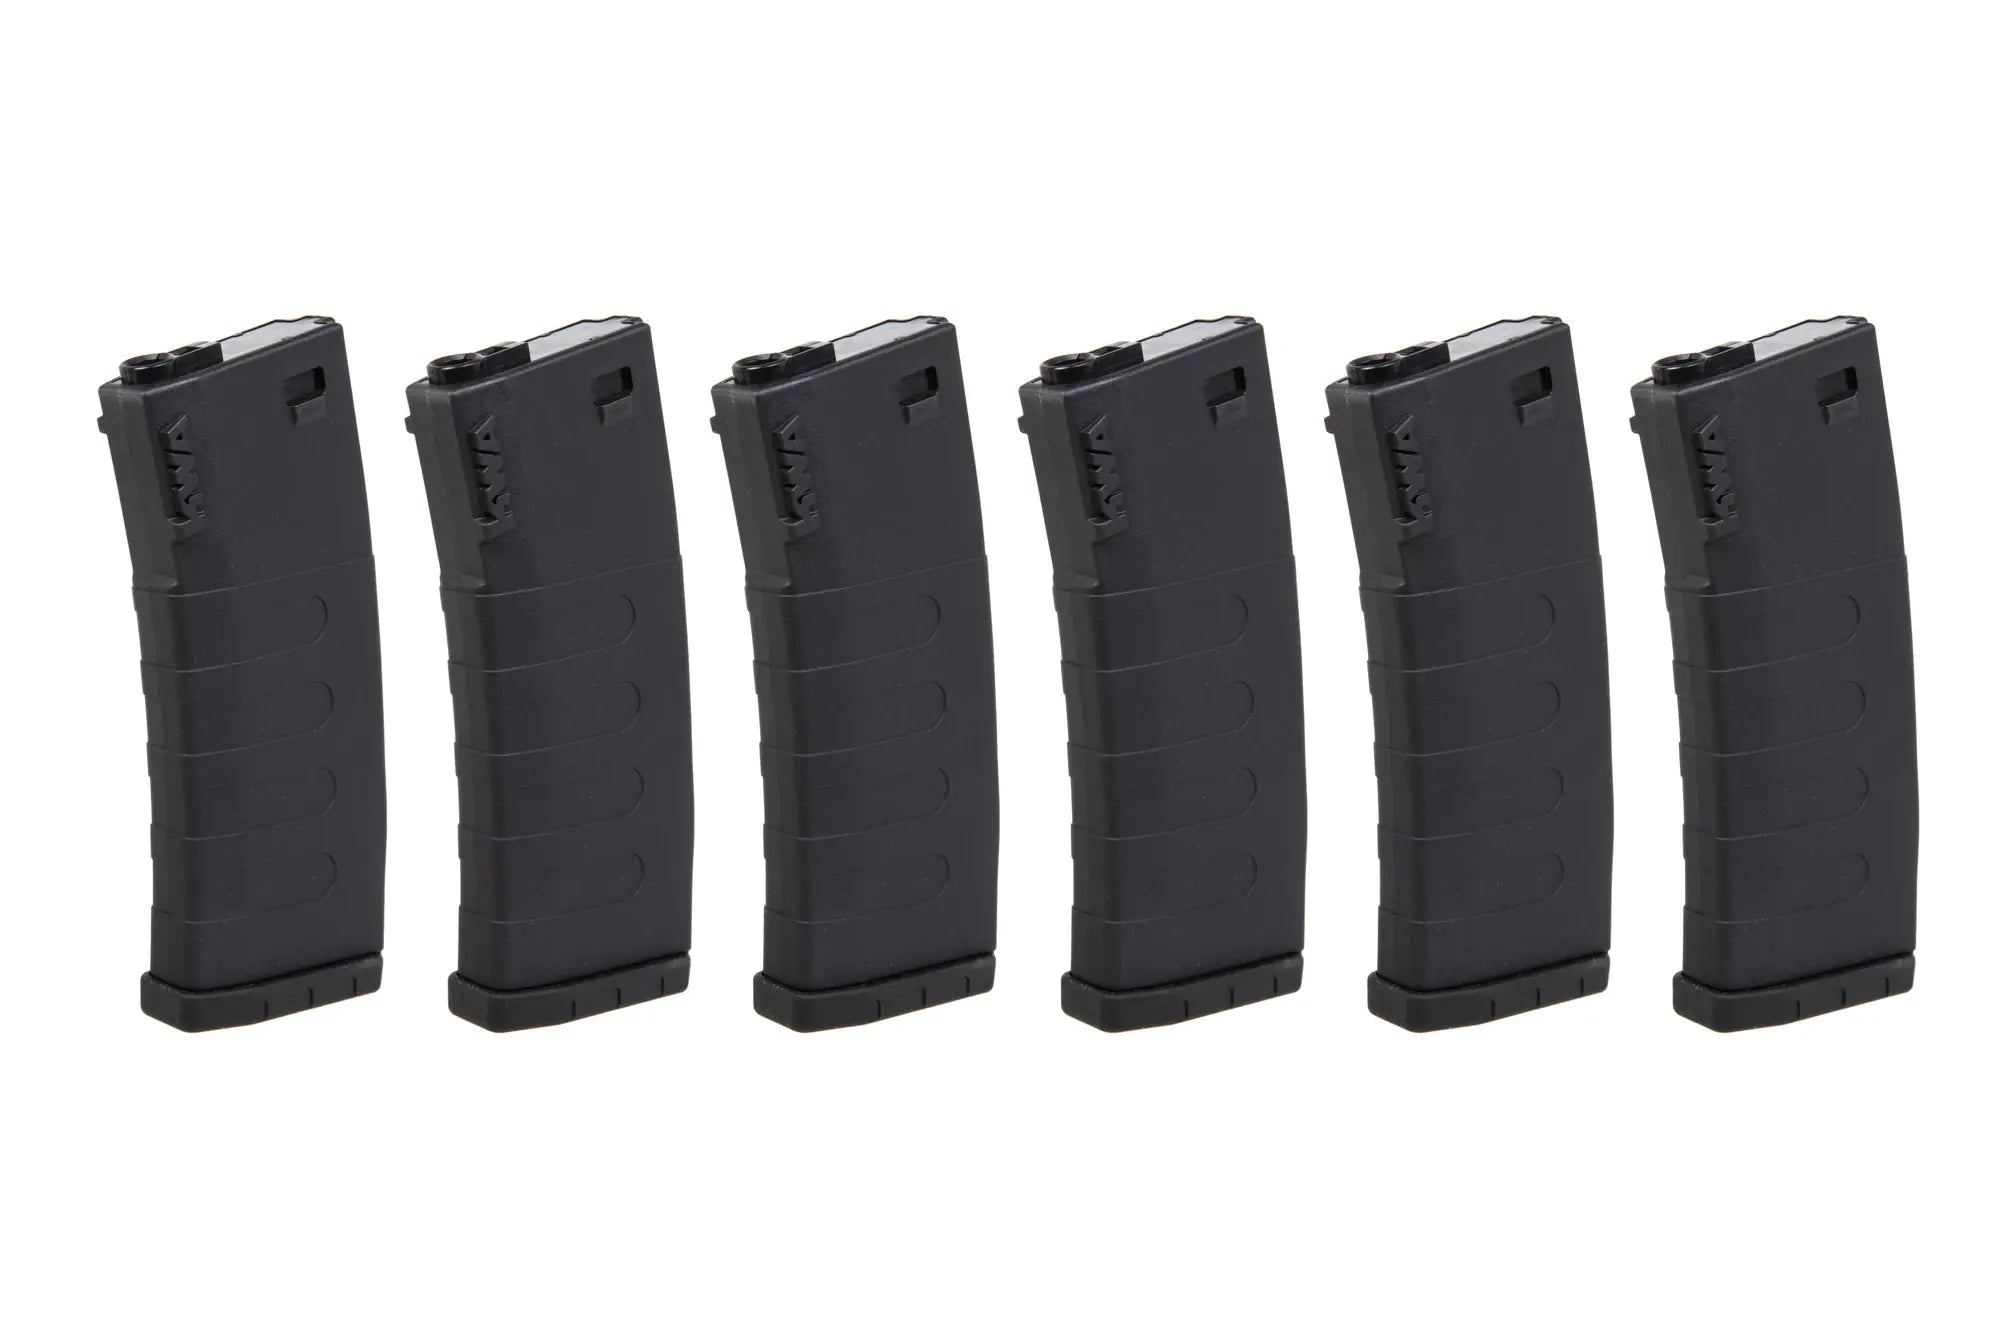 Set of 6 mid-cap KWA magazines for 120 BBs for M4/M16 replicas Black